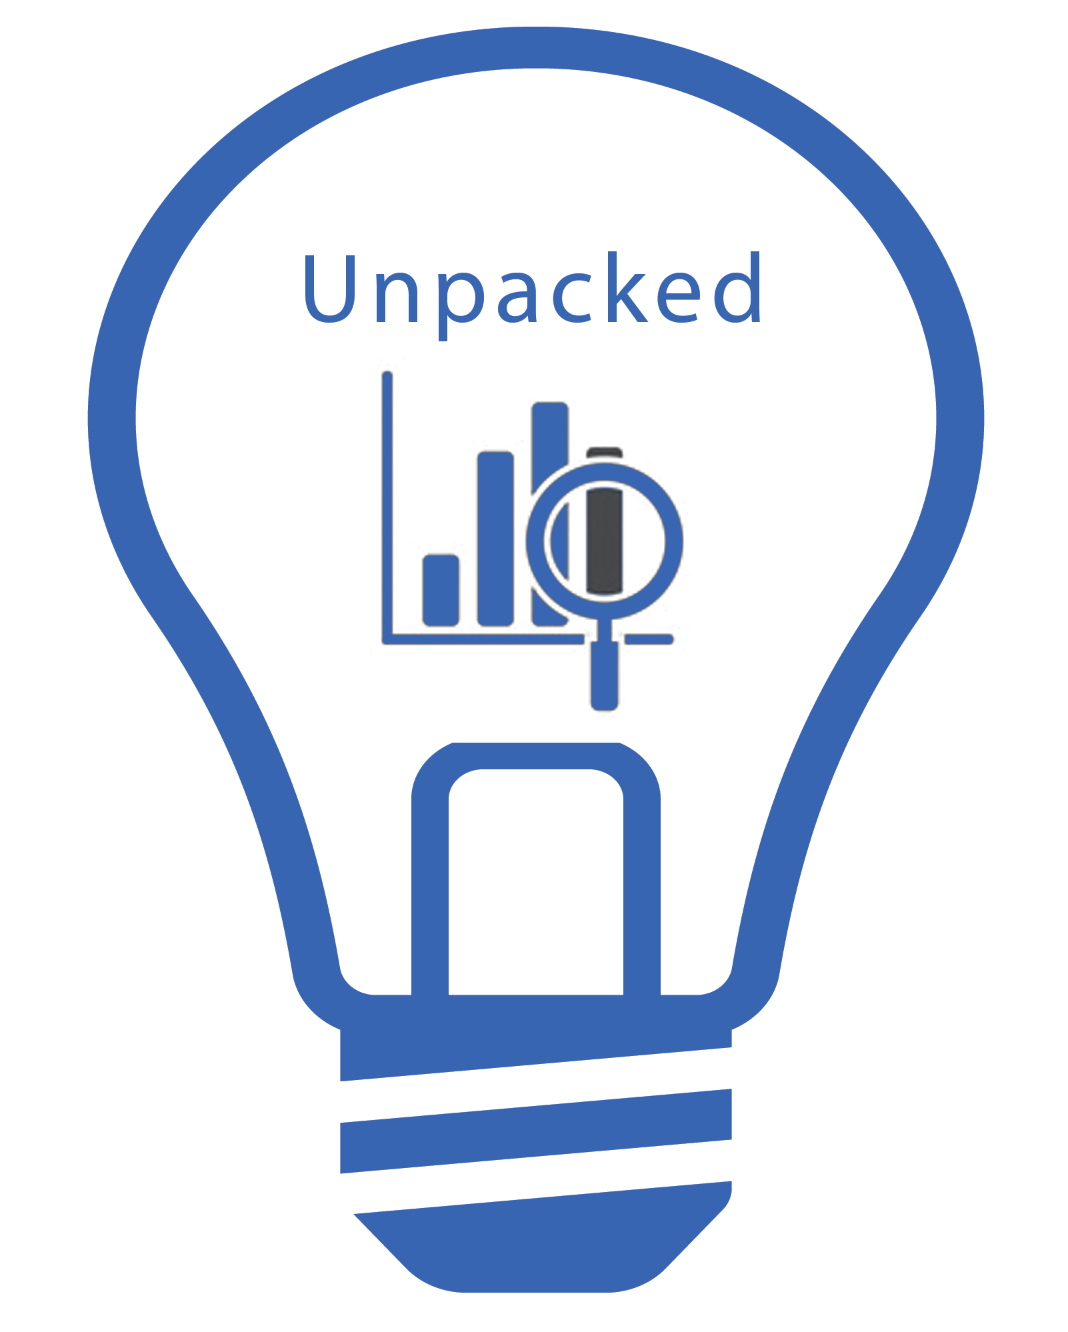 Unpacked for Friday, August 19, 2016